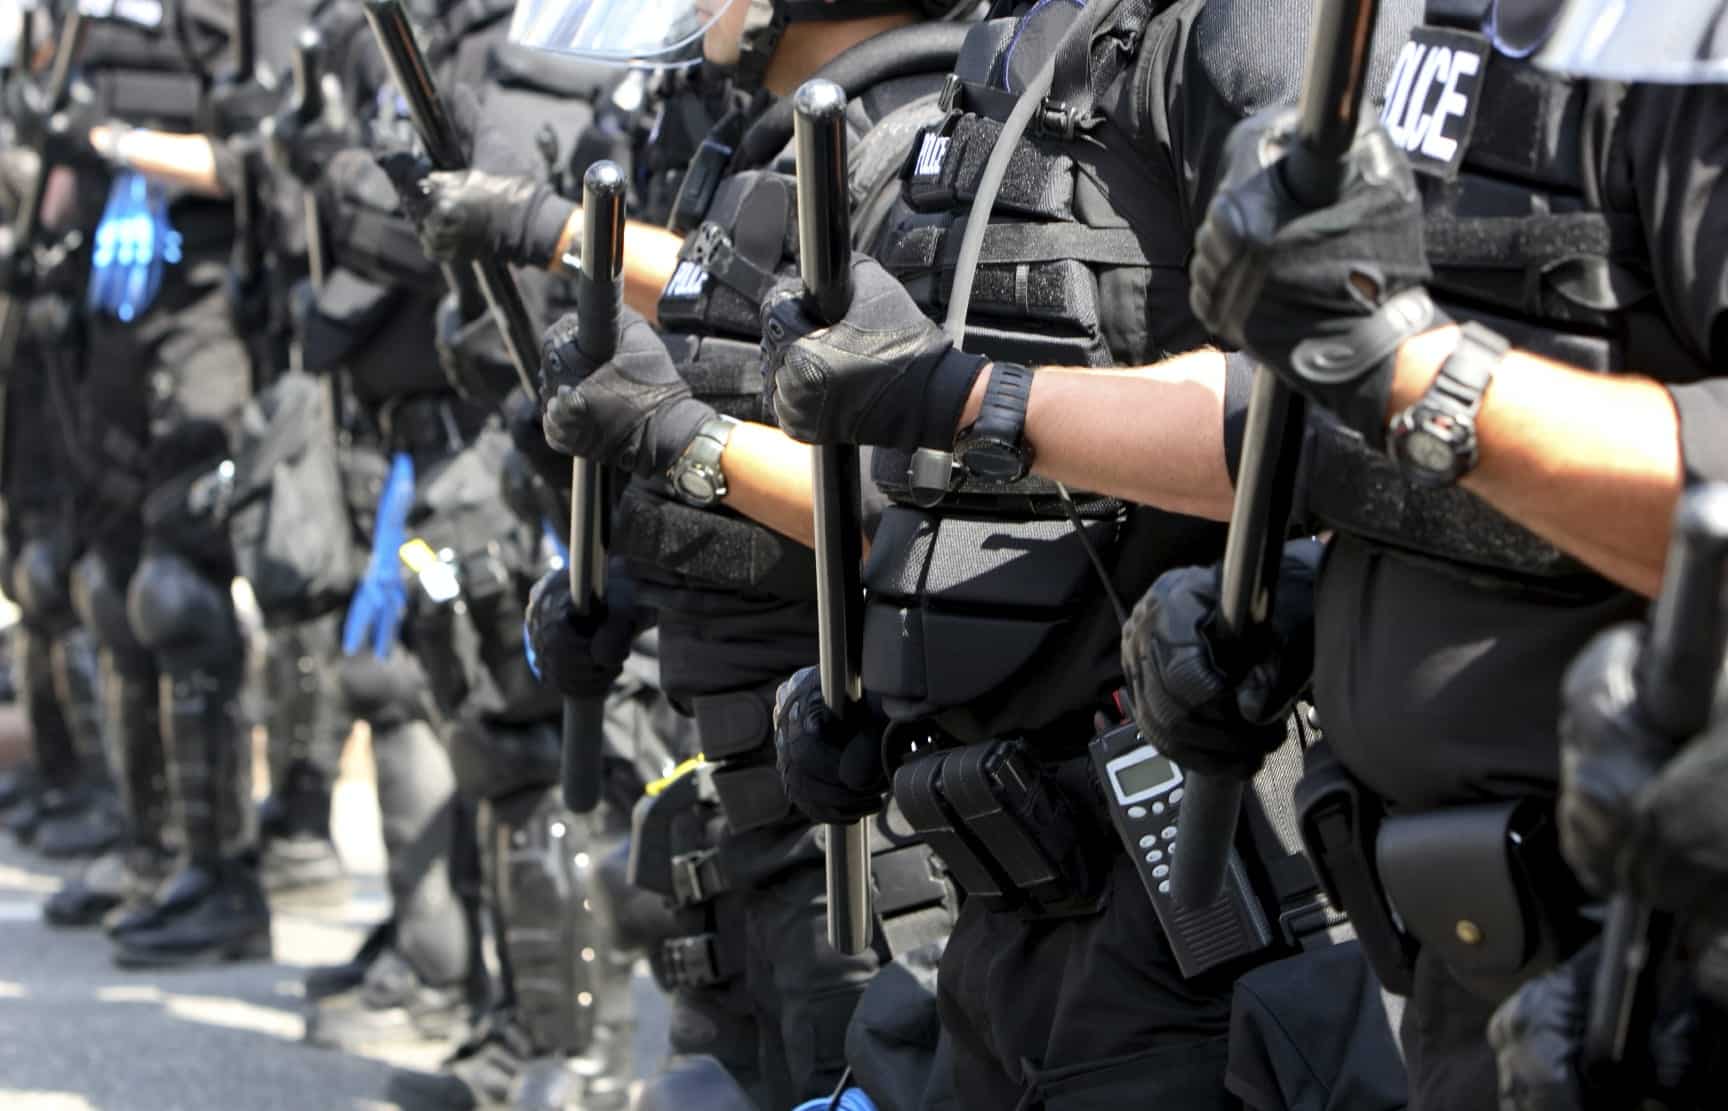 Black Fear, Militarized Police and Police Shootings